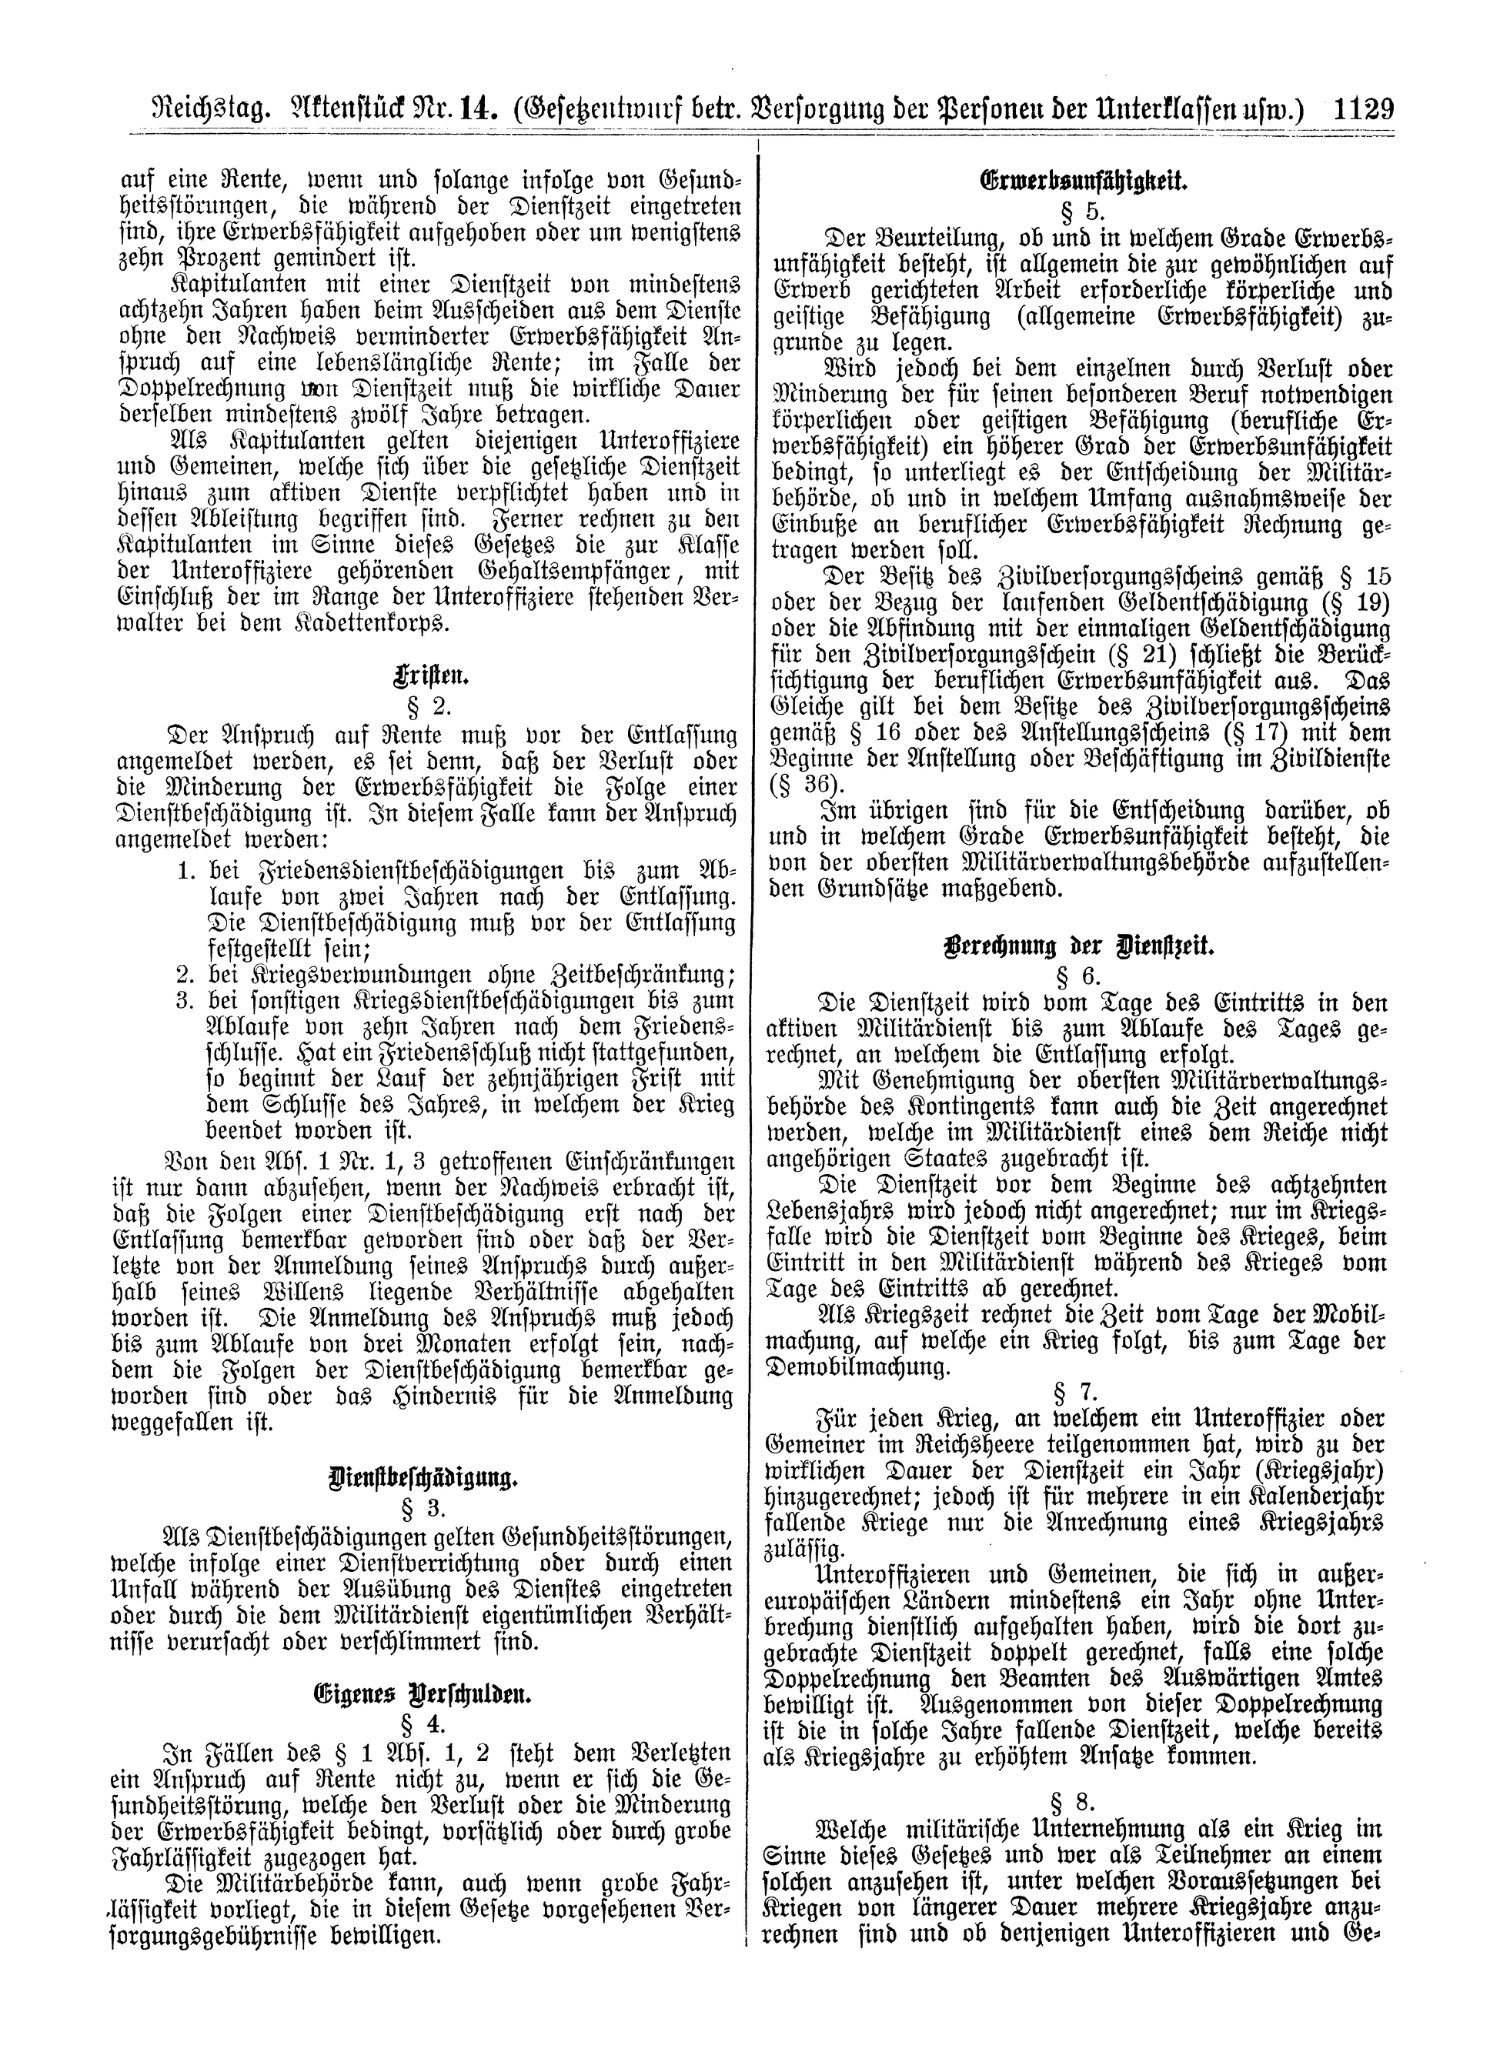 Scan of page 1129